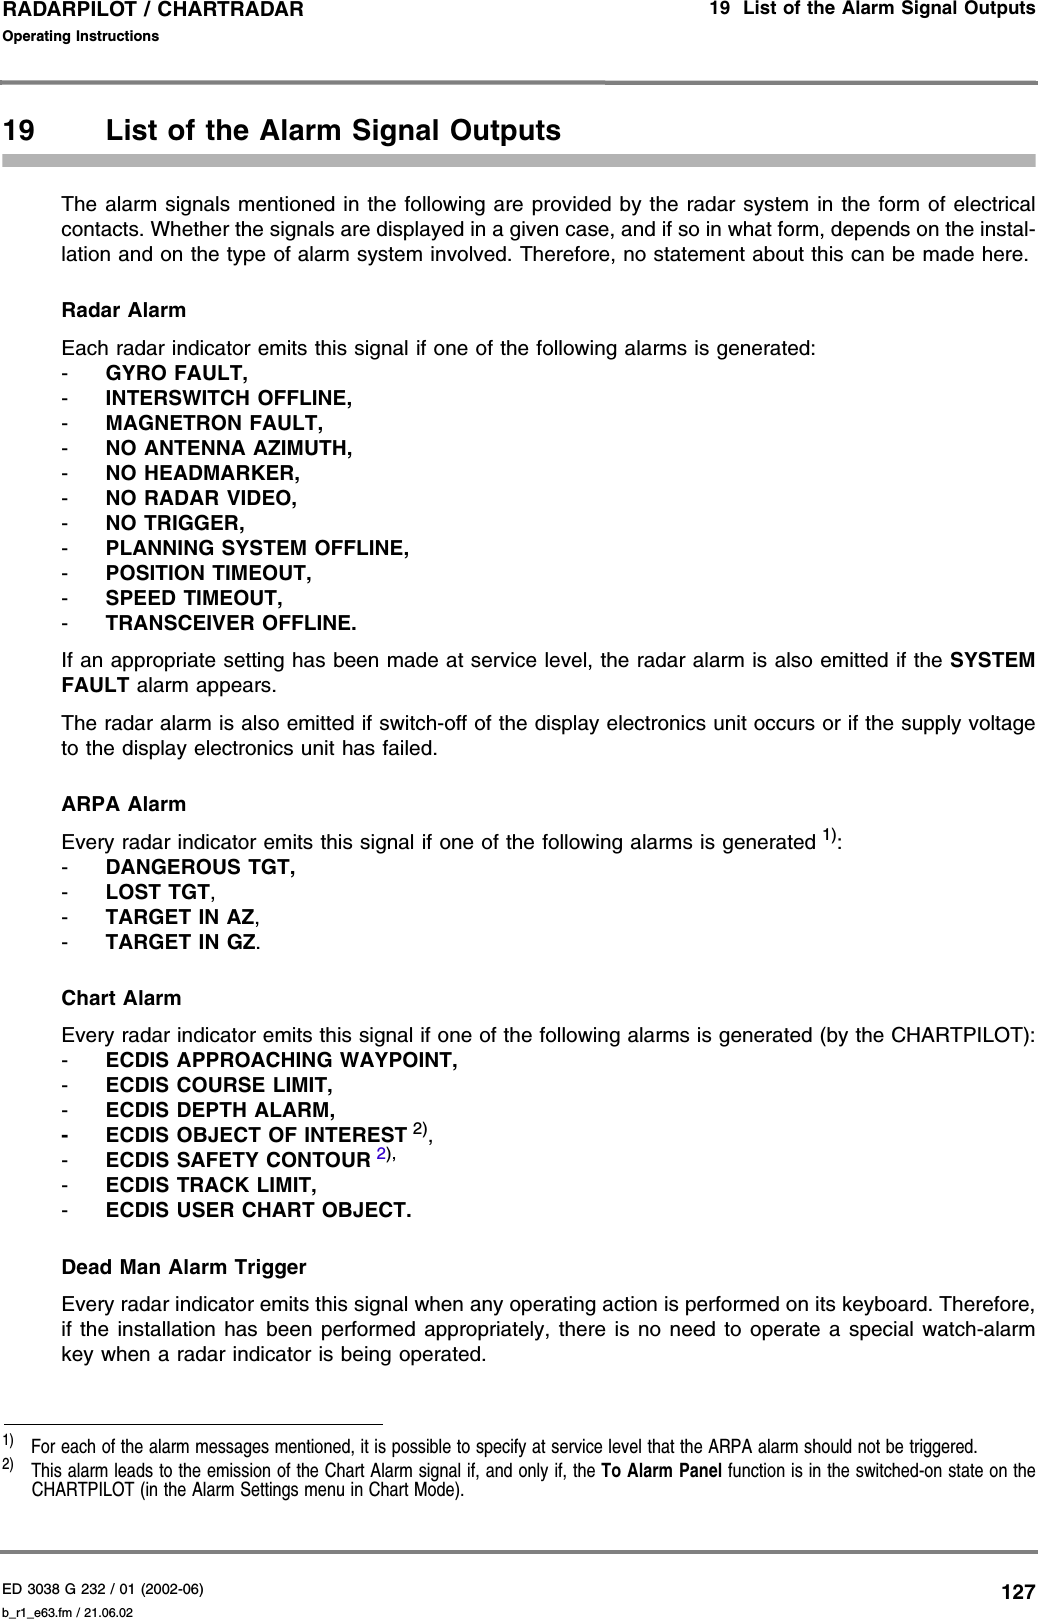 ED 3038 G 232 / 01 (2002-06) Operating Instructions19  List of the Alarm Signal Outputsb_r1_e63.fm / 21.06.02127RADARPILOT / CHARTRADAR 19 List of the Alarm Signal OutputsThe alarm signals mentioned in the following are provided by the radar system in the form of electricalcontacts. Whether the signals are displayed in a given case, and if so in what form, depends on the instal-lation and on the type of alarm system involved. Therefore, no statement about this can be made here.Radar AlarmEach radar indicator emits this signal if one of the following alarms is generated:-GYRO FAULT,-INTERSWITCH OFFLINE,-MAGNETRON FAULT,-NO ANTENNA AZIMUTH,-NO HEADMARKER,-NO RADAR VIDEO,-NO TRIGGER,-PLANNING SYSTEM OFFLINE,-POSITION TIMEOUT,-SPEED TIMEOUT,-TRANSCEIVER OFFLINE.If an appropriate setting has been made at service level, the radar alarm is also emitted if the SYSTEMFAULT alarm appears.The radar alarm is also emitted if switch-off of the display electronics unit occurs or if the supply voltageto the display electronics unit has failed.ARPA AlarmEvery radar indicator emits this signal if one of the following alarms is generated 1):-DANGEROUS TGT,-LOST TGT,-TARGET IN AZ,-TARGET IN GZ.Chart AlarmEvery radar indicator emits this signal if one of the following alarms is generated (by the CHARTPILOT):-ECDIS APPROACHING WAYPOINT,-ECDIS COURSE LIMIT,-ECDIS DEPTH ALARM,- ECDIS OBJECT OF INTEREST 2),-ECDIS SAFETY CONTOUR 2),-ECDIS TRACK LIMIT,-ECDIS USER CHART OBJECT.Dead Man Alarm TriggerEvery radar indicator emits this signal when any operating action is performed on its keyboard. Therefore,if the installation has been performed appropriately, there is no need to operate a special watch-alarmkey when a radar indicator is being operated.1)  For each of the alarm messages mentioned, it is possible to specify at service level that the ARPA alarm should not be triggered.2)  This alarm leads to the emission of the Chart Alarm signal if, and only if, the To Alarm Panel function is in the switched-on state on theCHARTPILOT (in the Alarm Settings menu in Chart Mode).